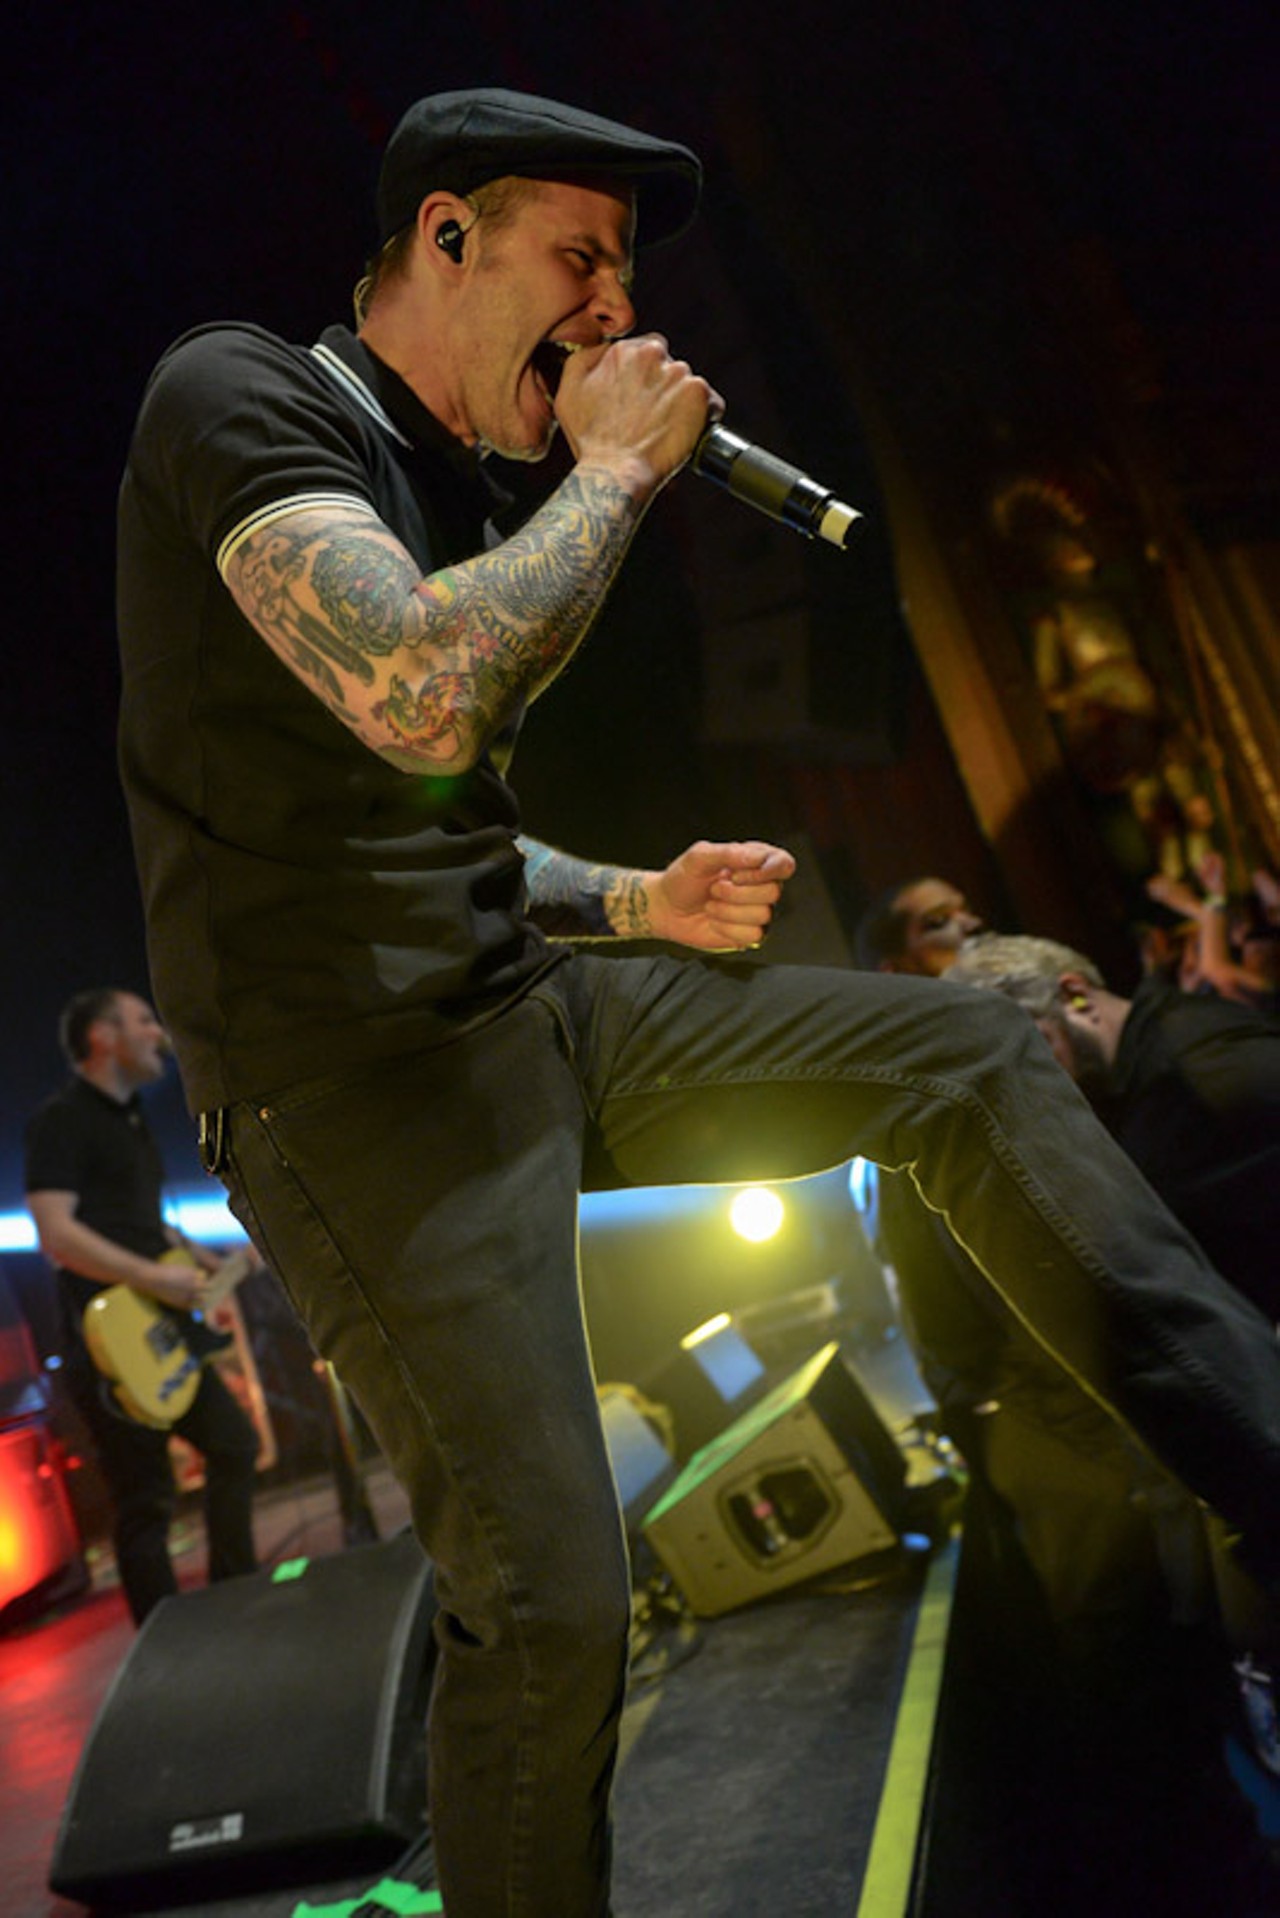 30 great photos from the Dropkick Murphys at the Fillmore